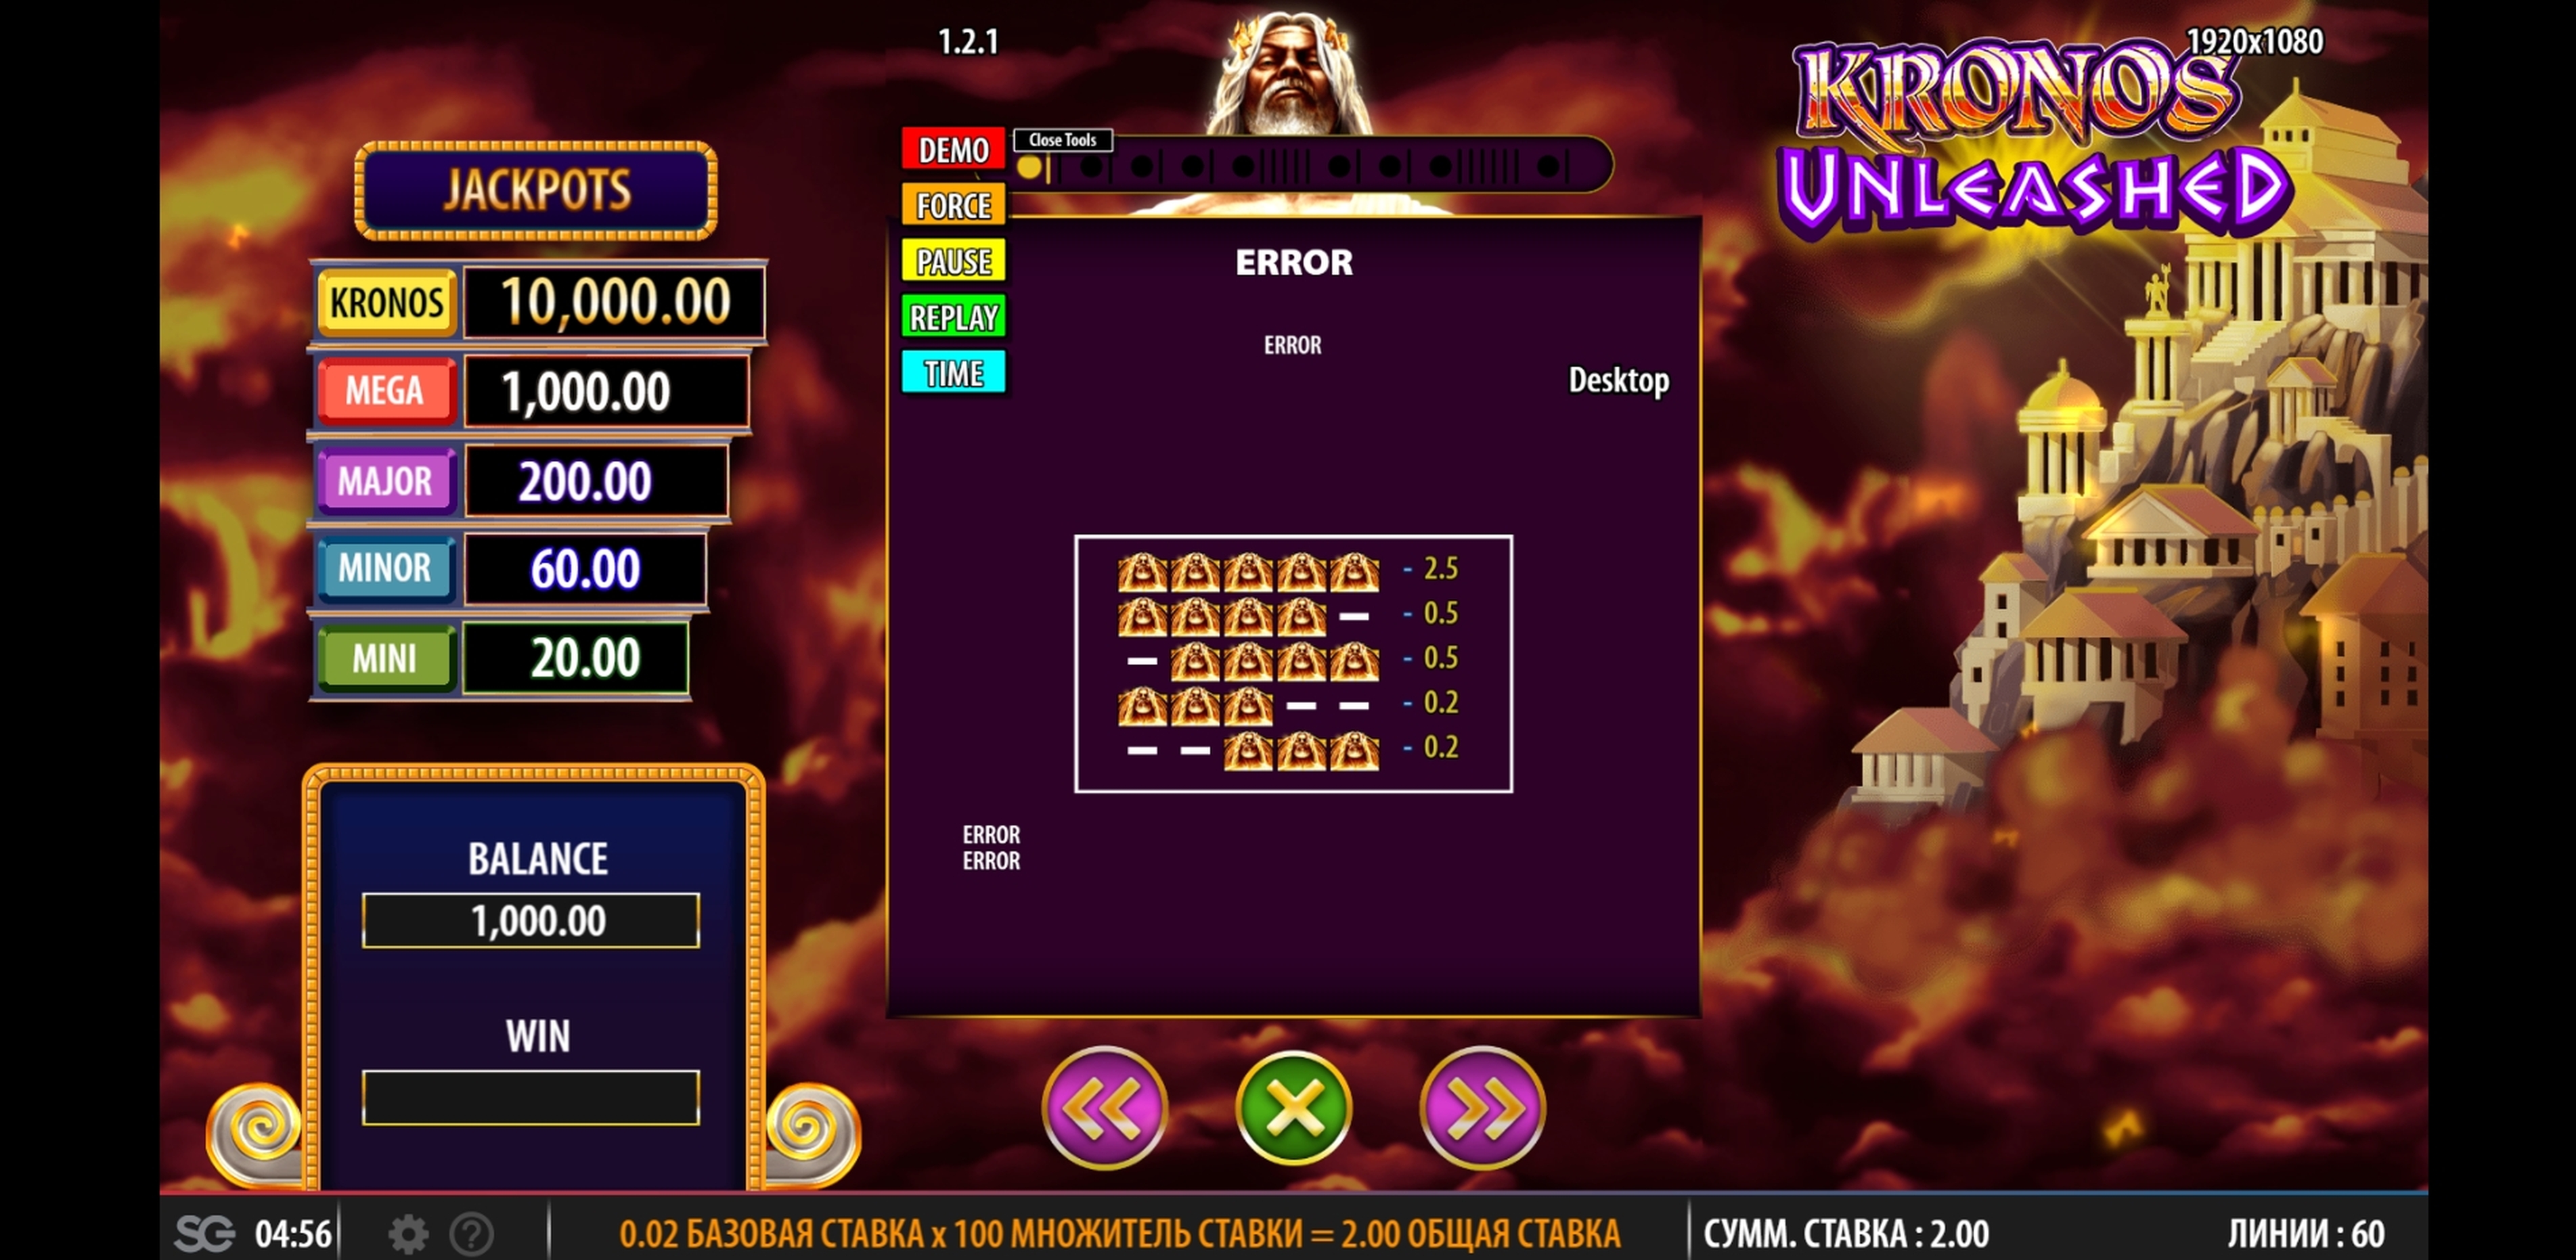 Info of Kronos Unleashed Slot Game by SG